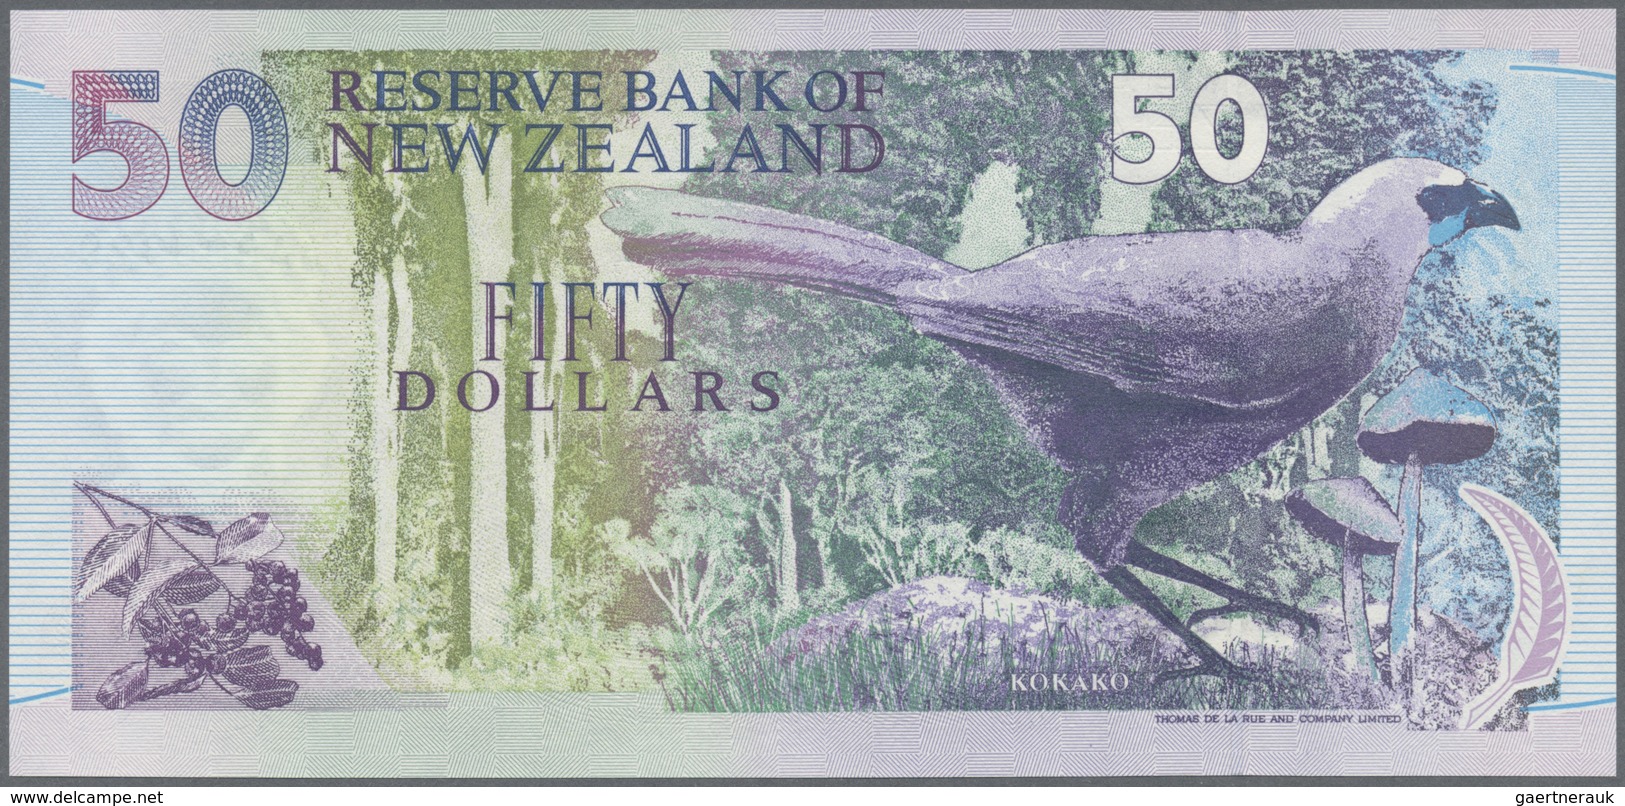 New Zealand / Neuseeland: Set with 6 Banknotes 5, 10, 20, 50 and 100 Dollars ND(1992-99) with matchi